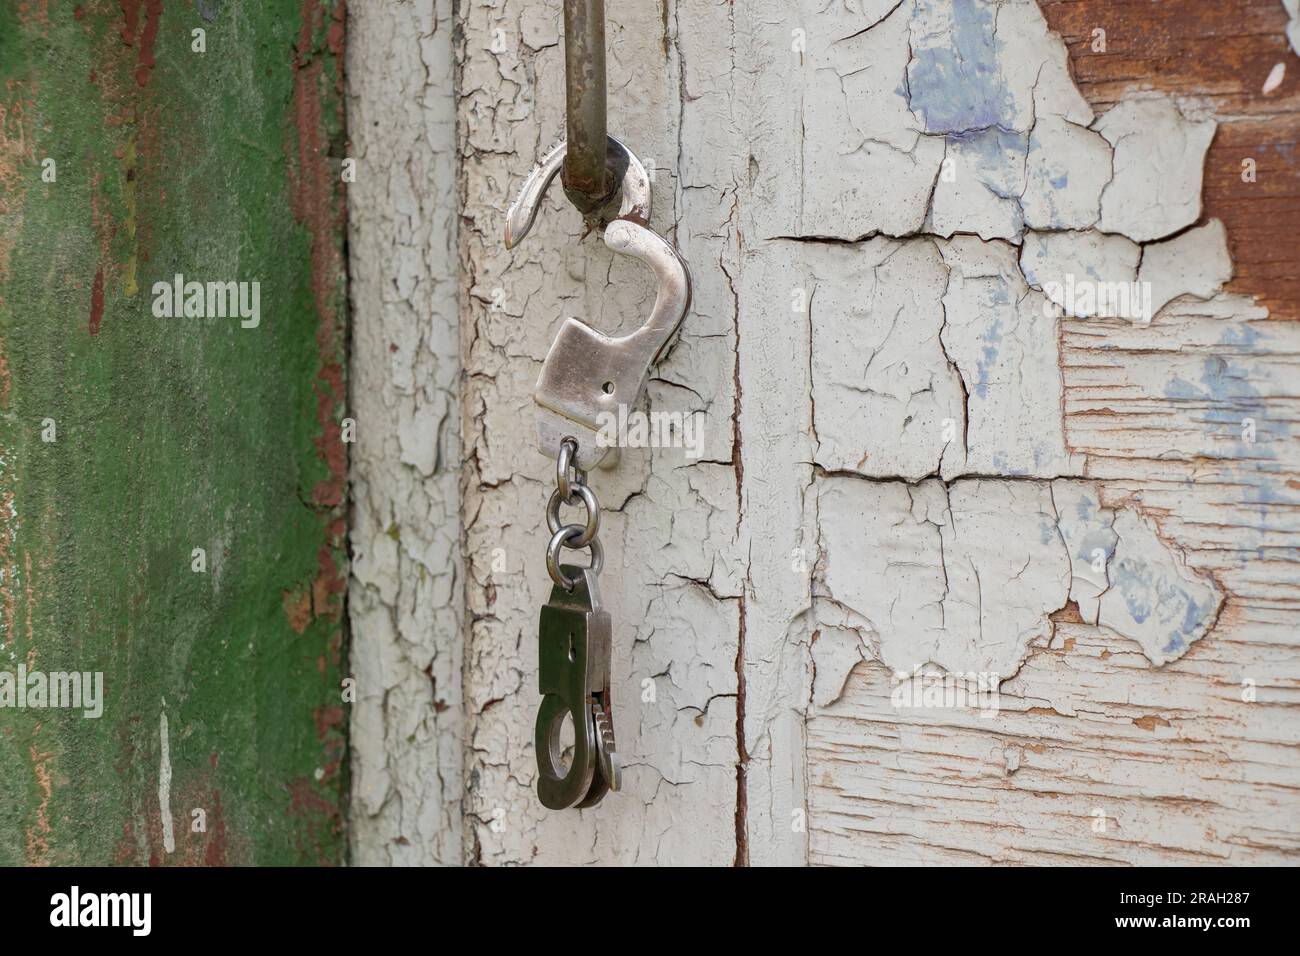 iron handcuffs hanging on the doorknob in the street Stock Photo